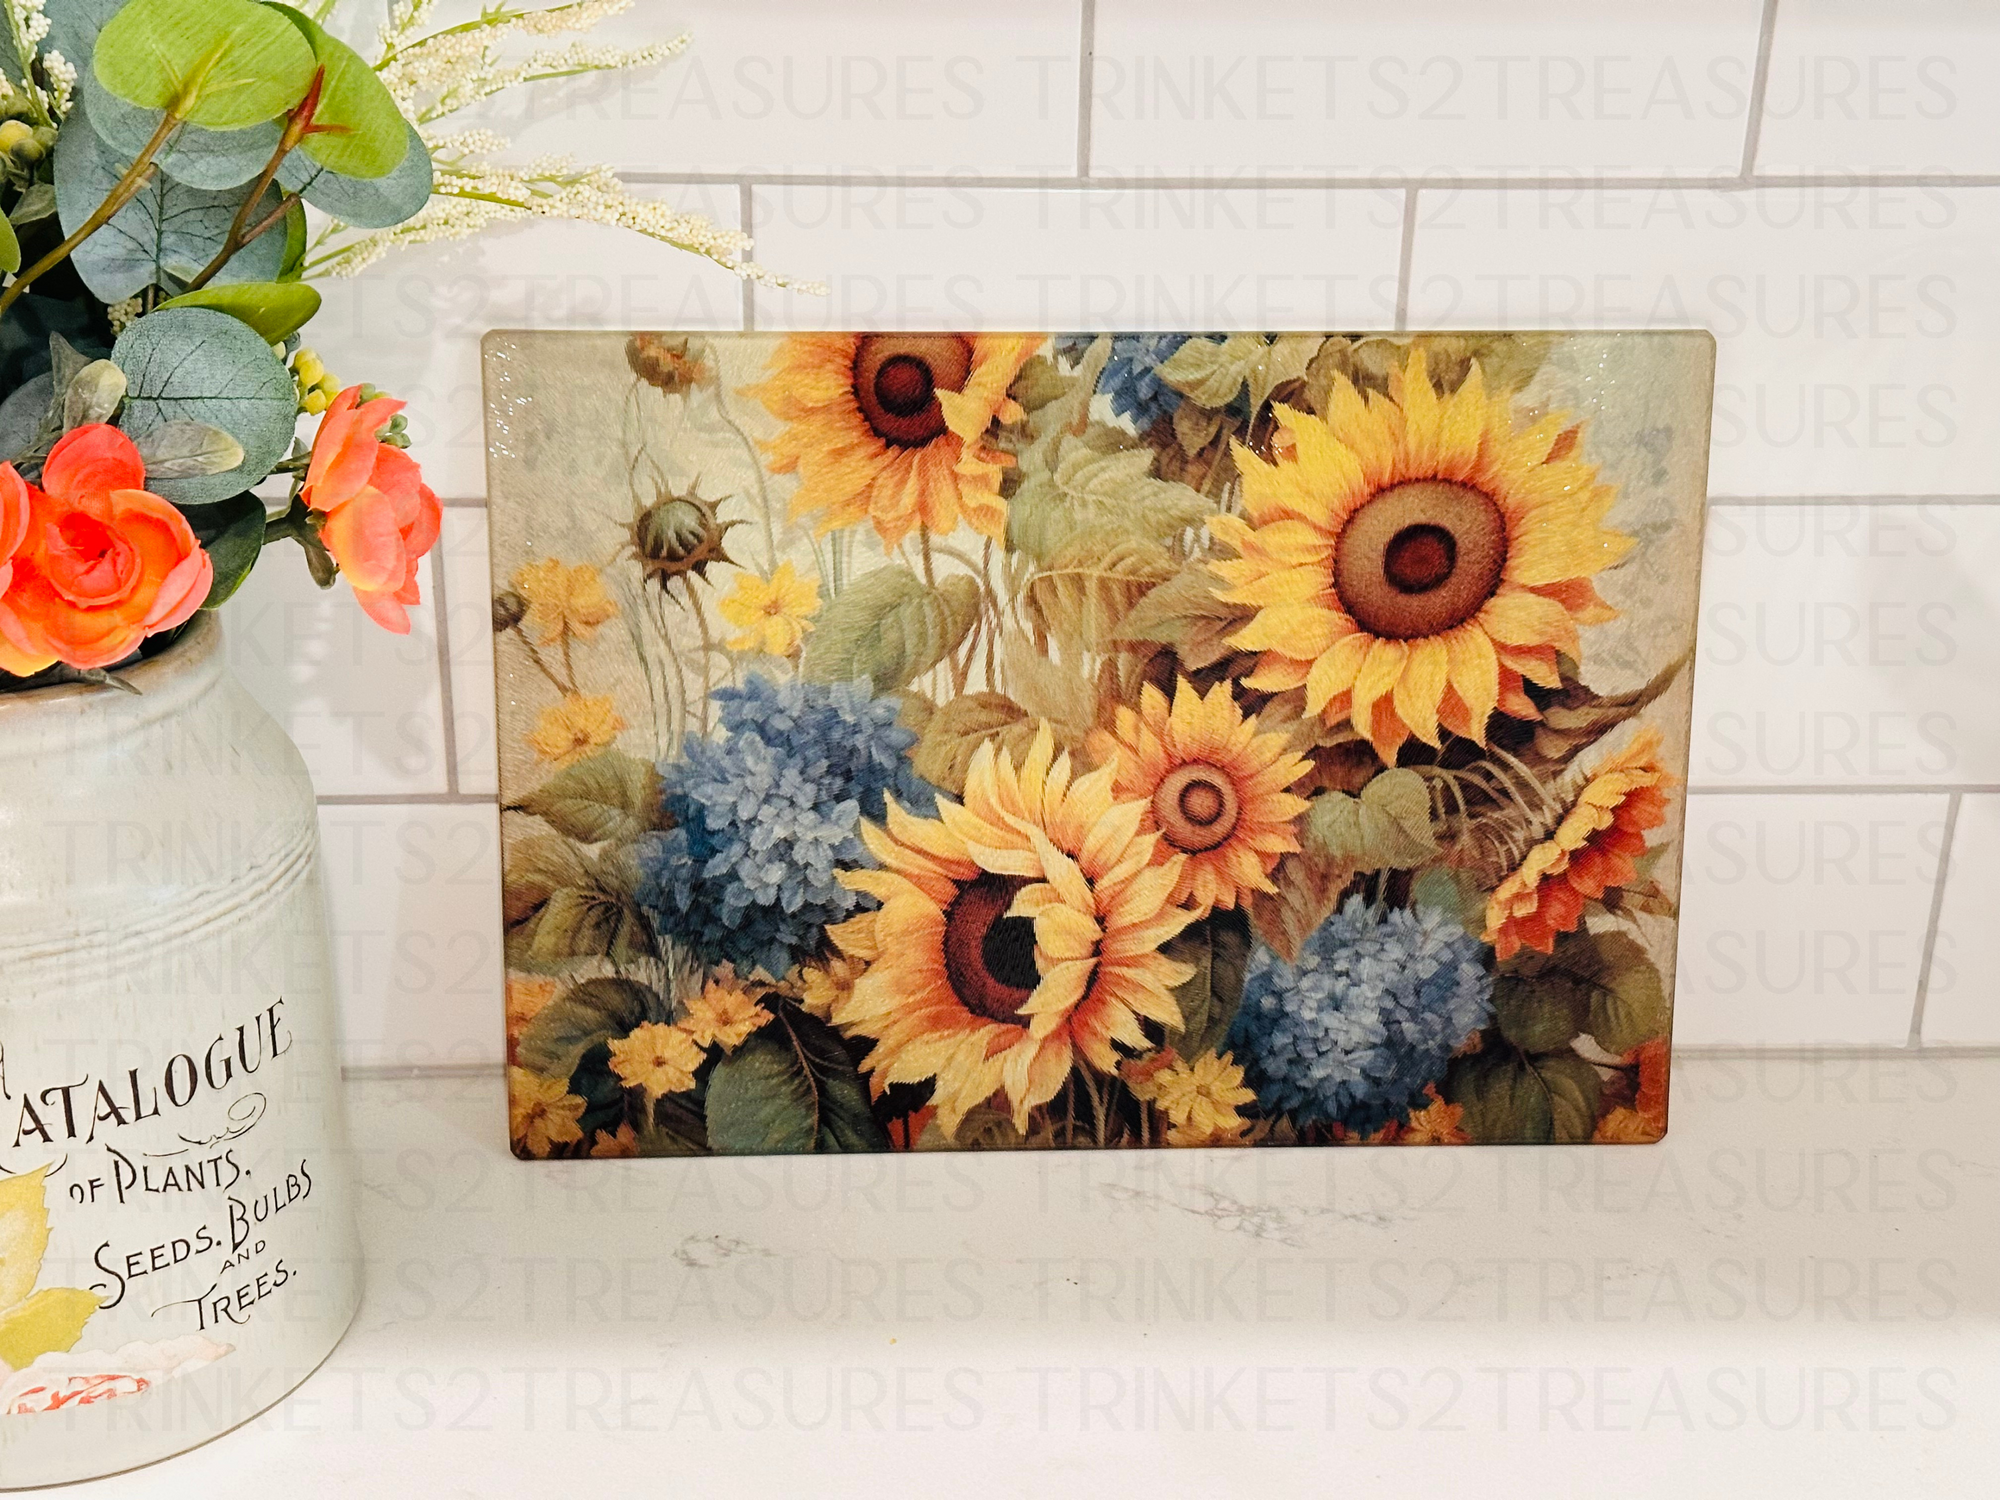 Personalized 8" x 11" Textured & Tempered Glass Cutting Board/Sunflower Field/#610